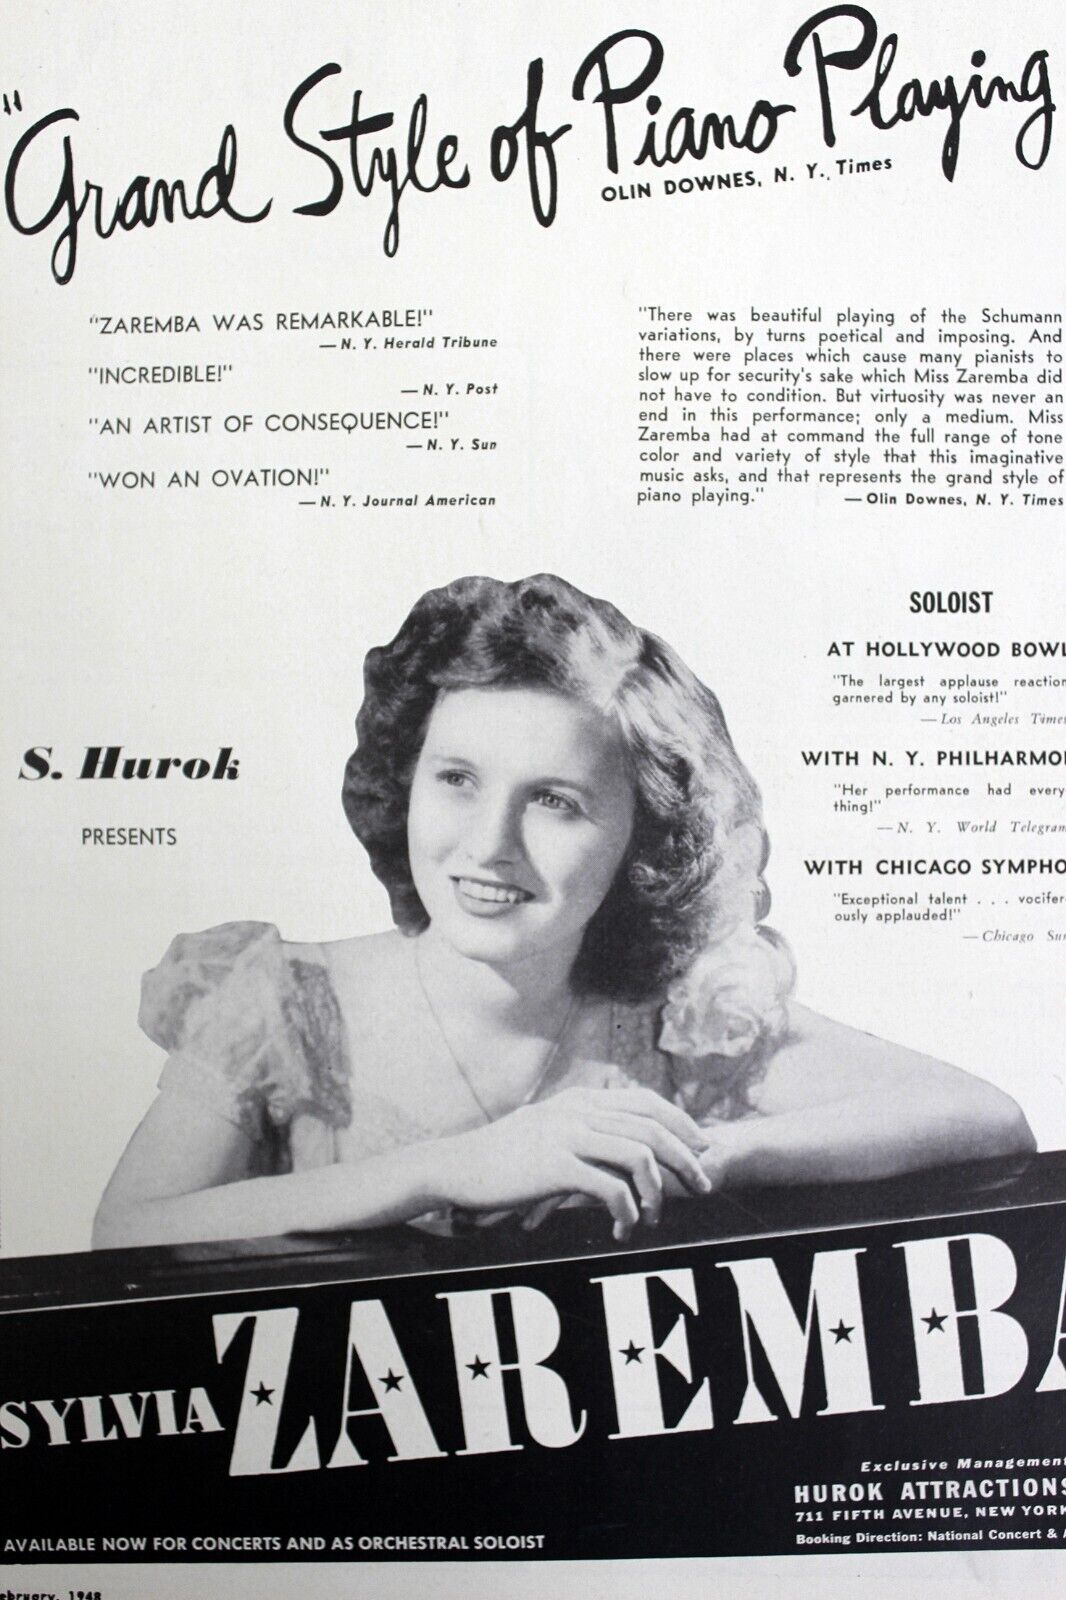 SYLVIA ZAREMBA Pianist and Soloist 1940s Booking Ad Concert Orchestra Performer